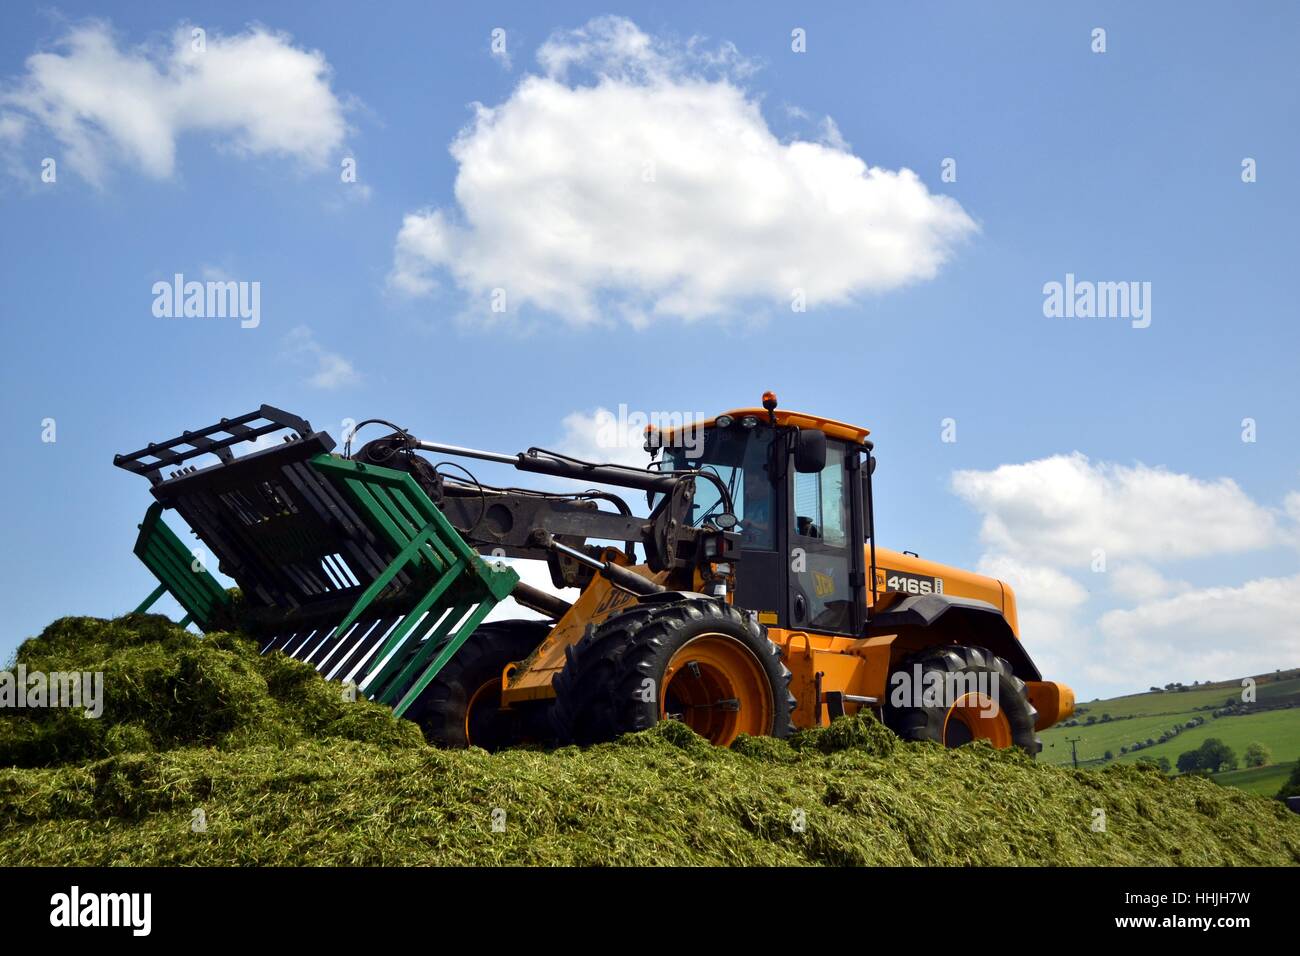 loader on the silage pit Stock Photo